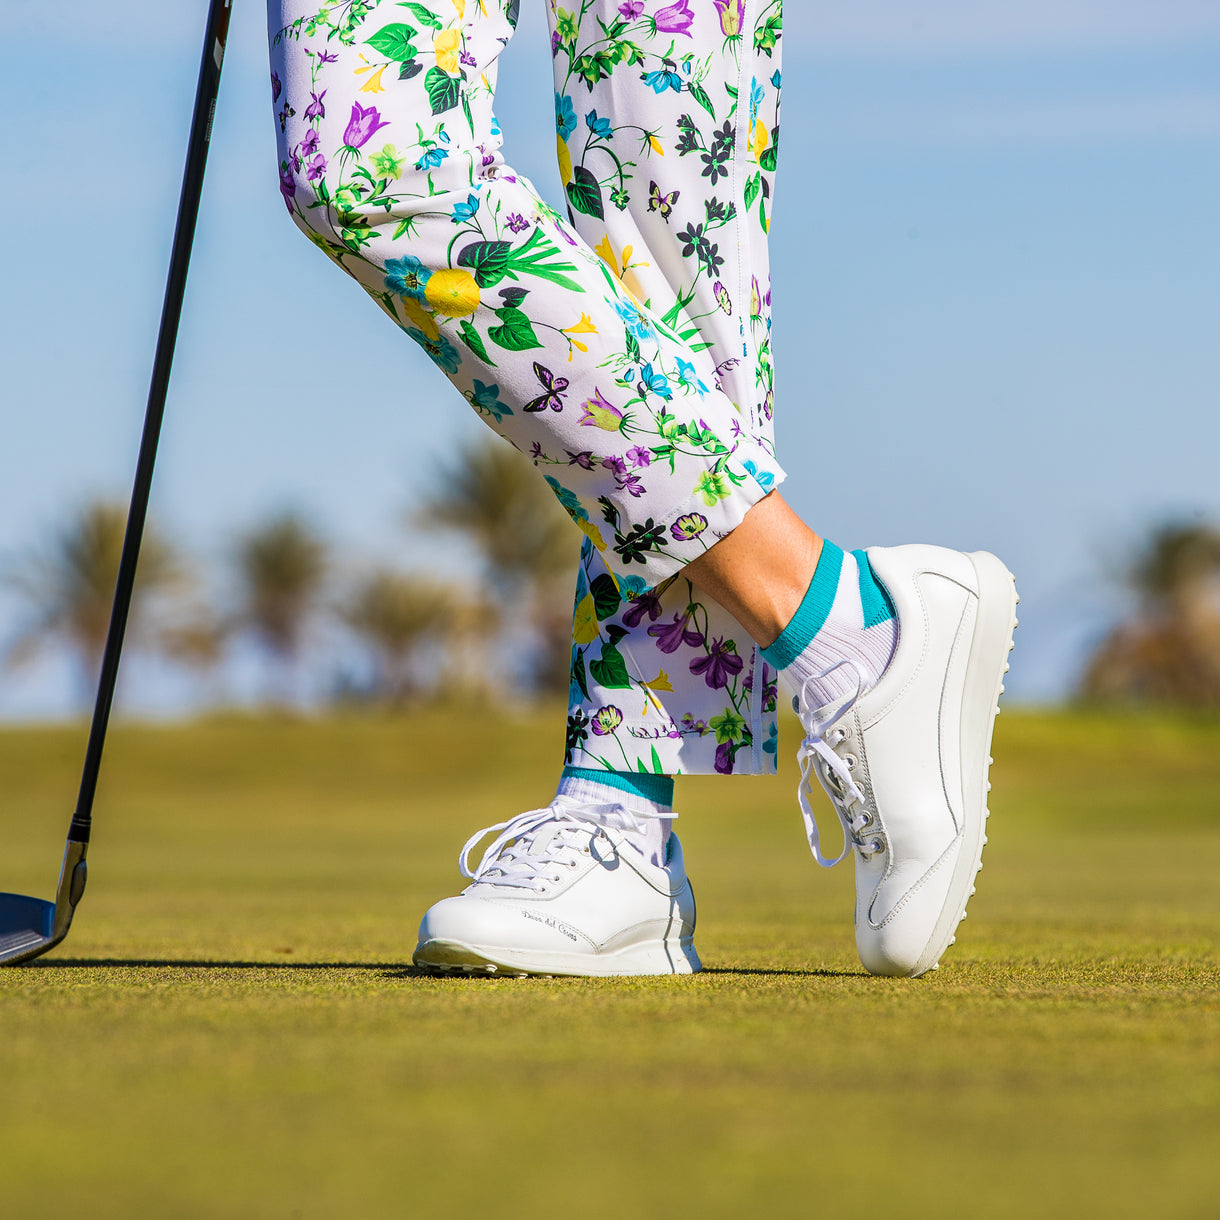 Winter Golf Fashion: Stay Warm and Stylish on the Course